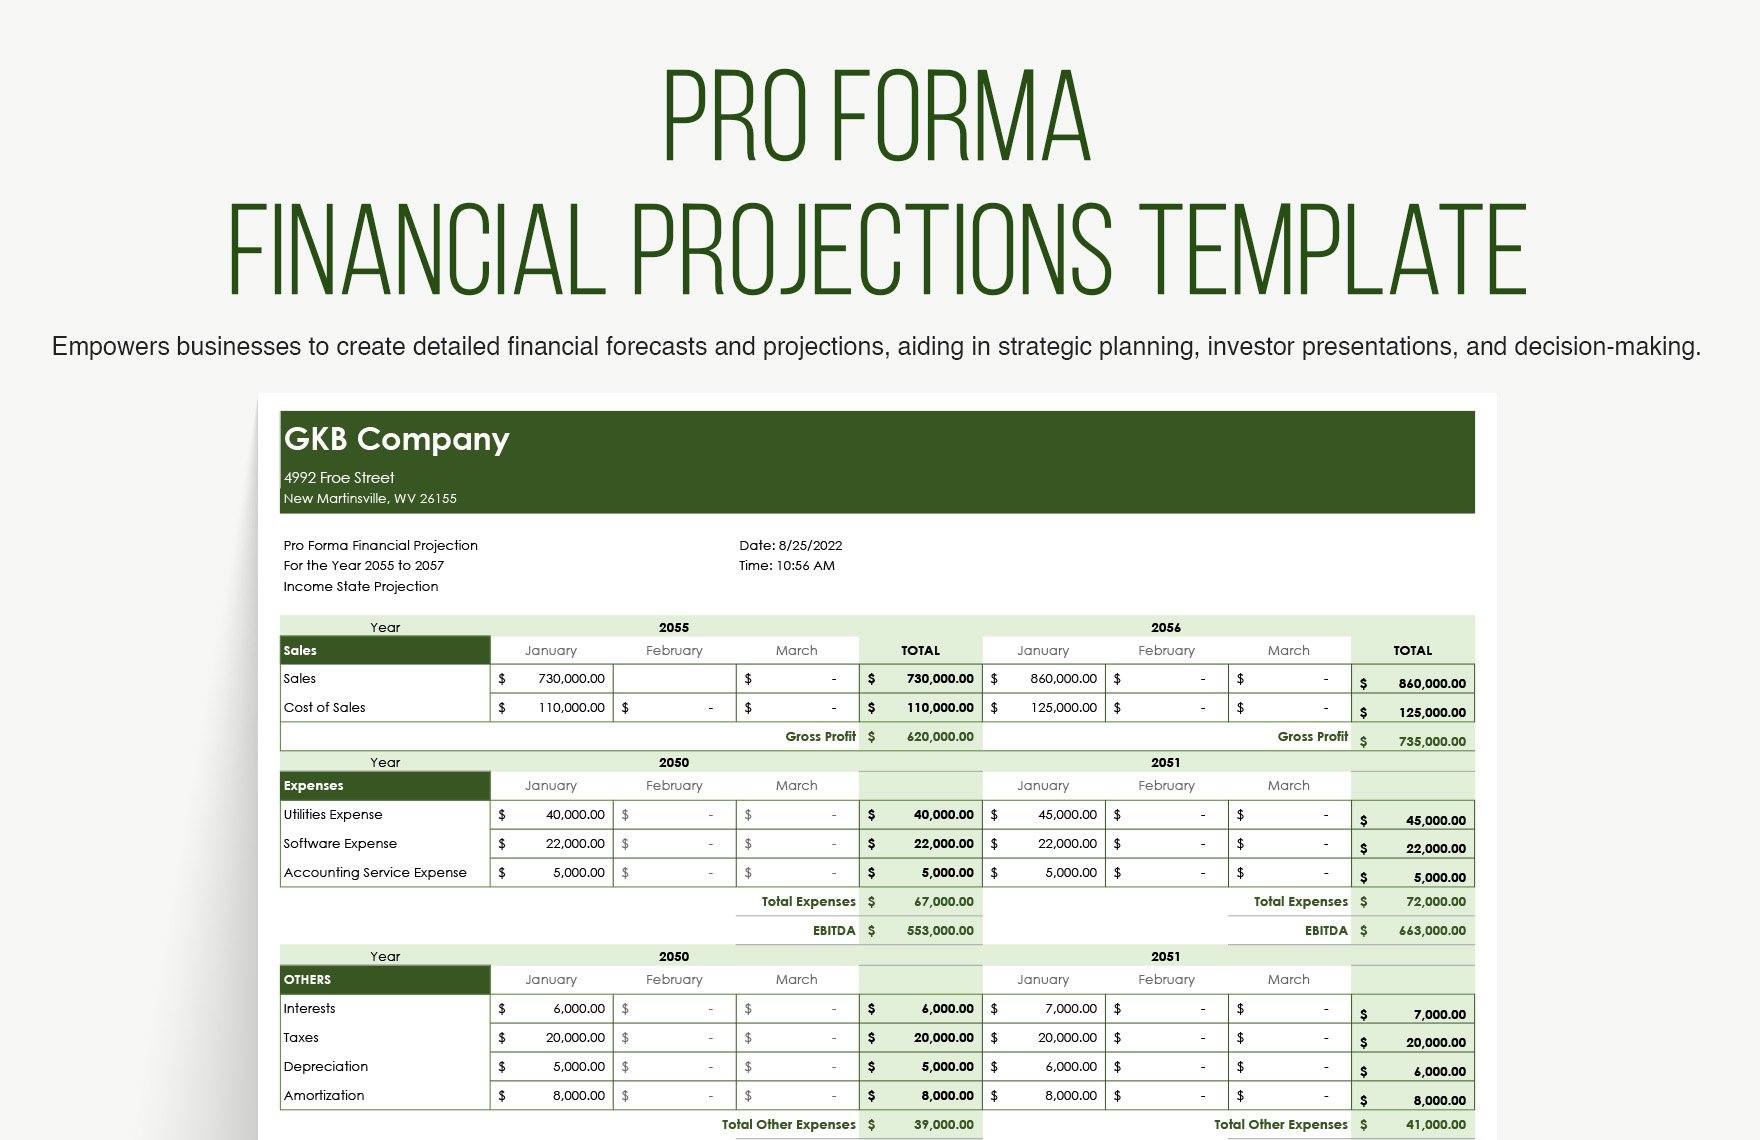 Pro Forma Financial Projections Template in Excel, Google Sheets